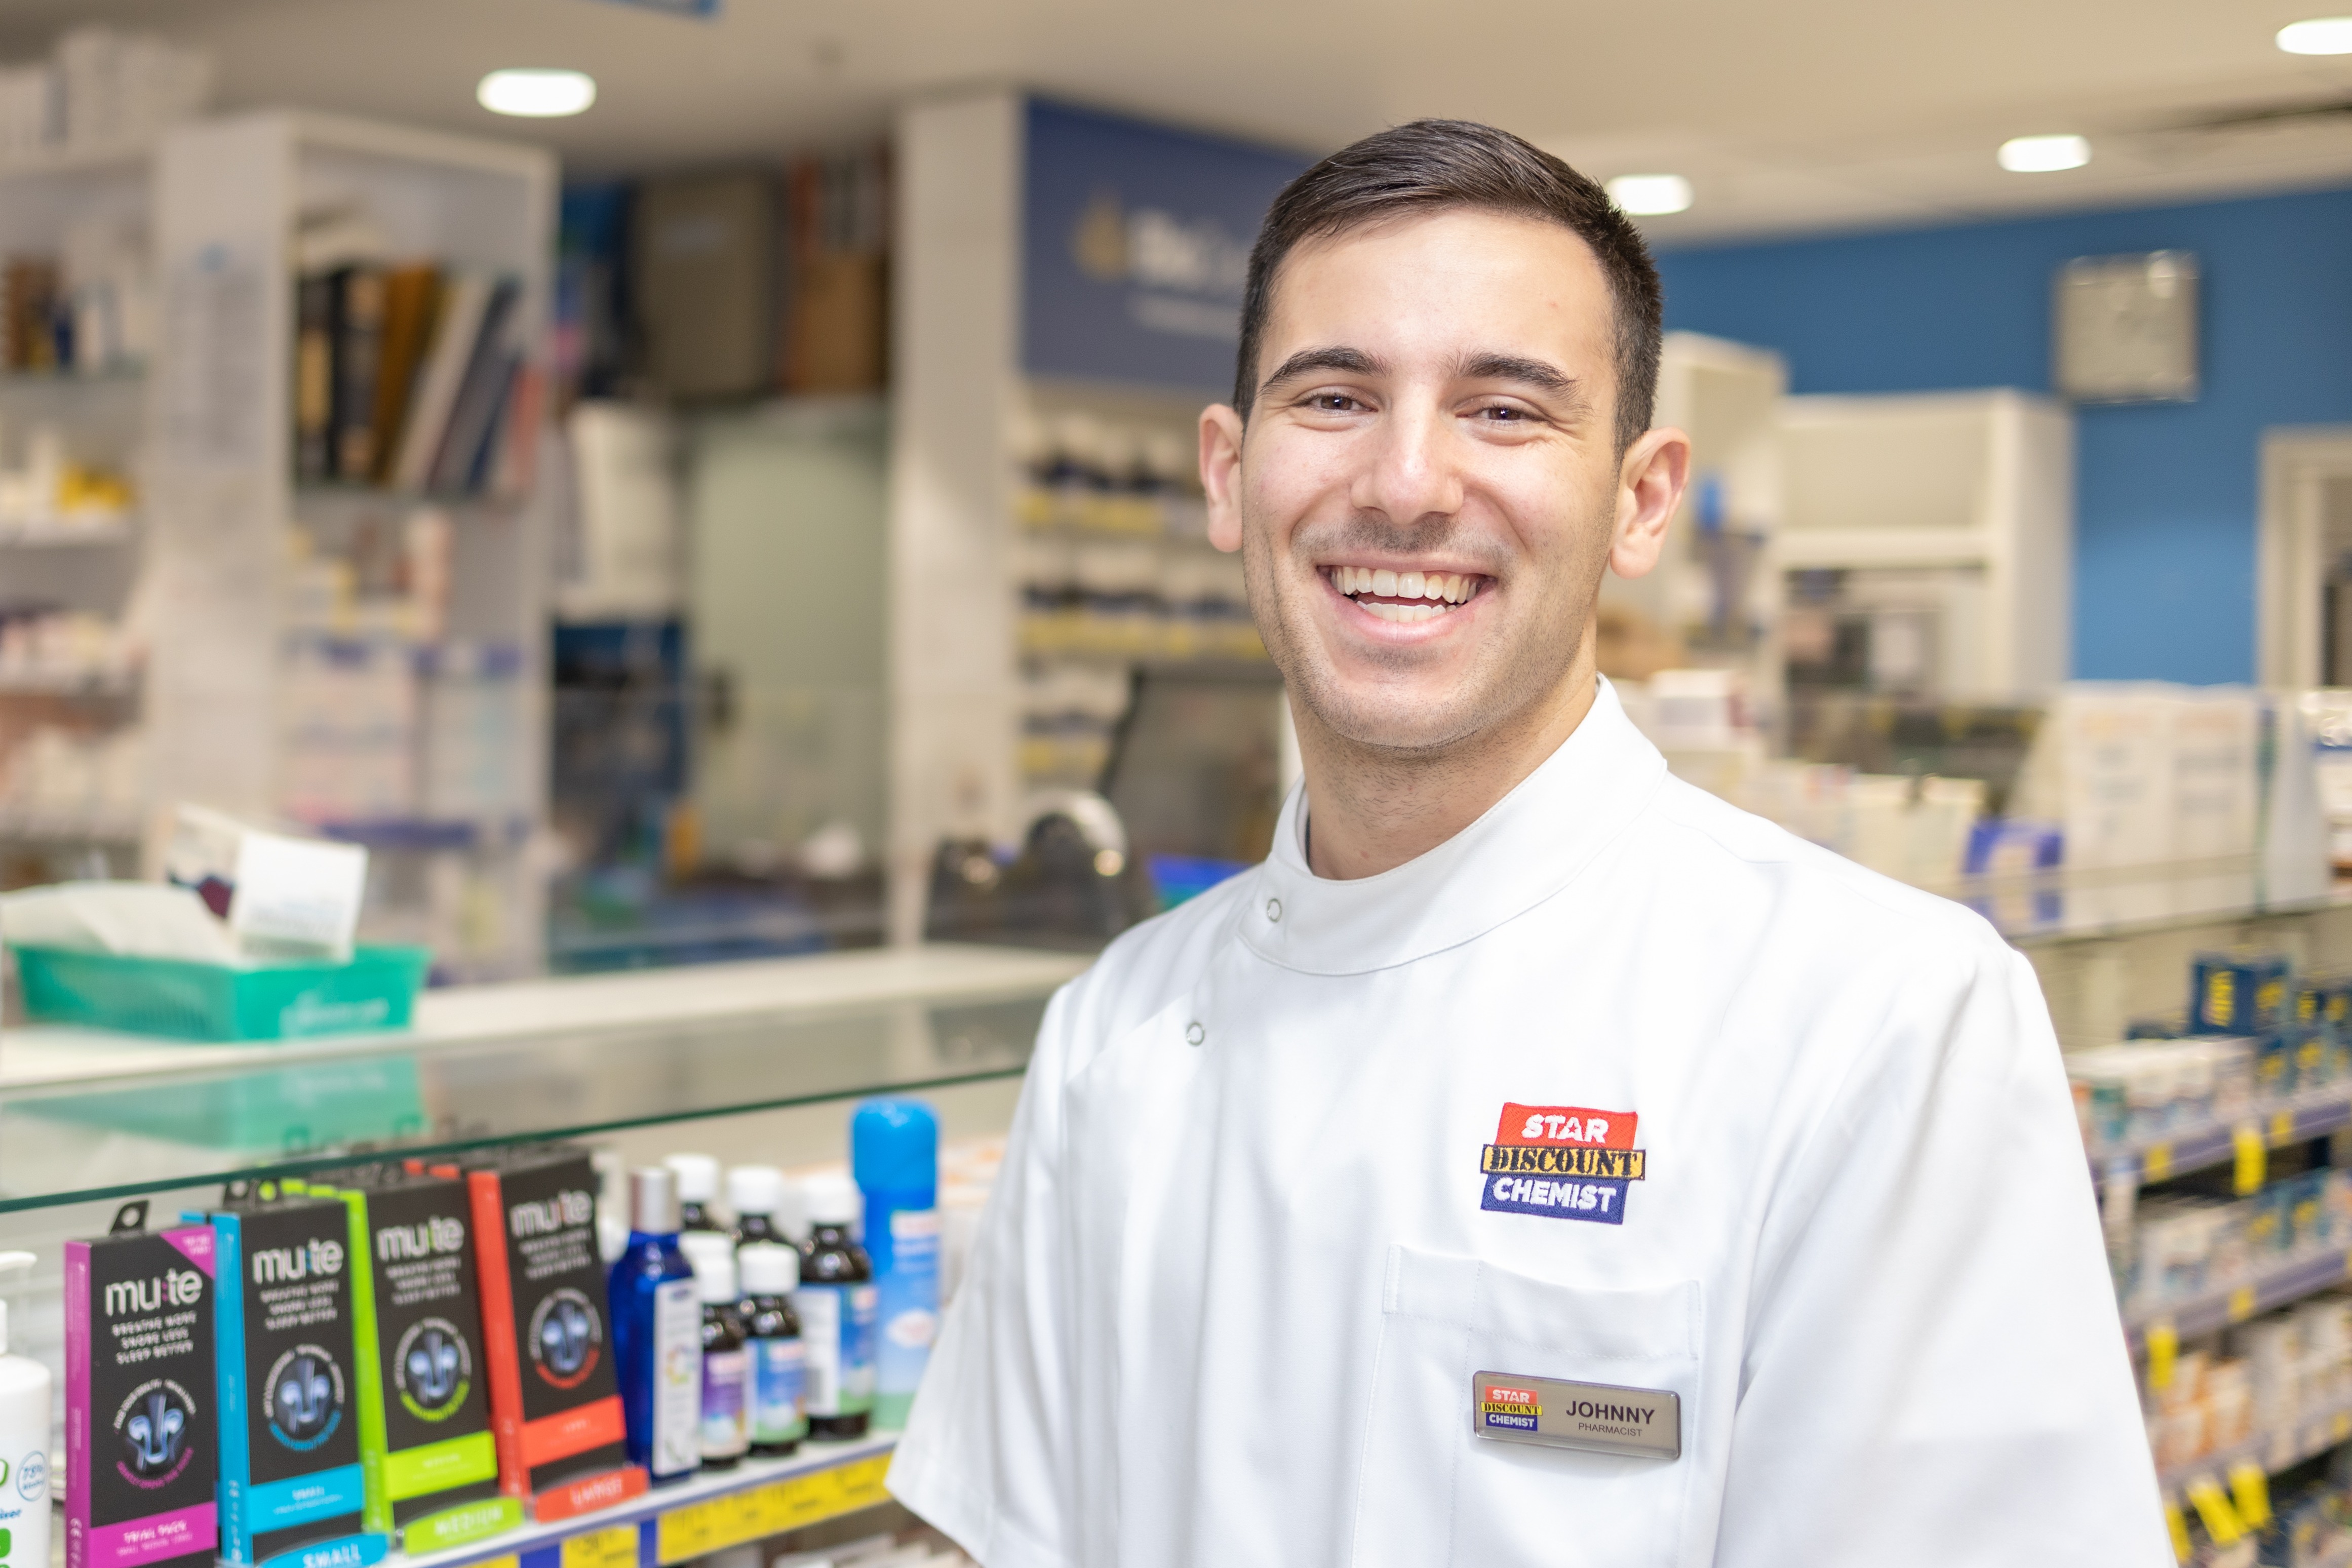 Visit us in-store for superior service and expert advice from our extensively trained staff and qualified pharmacists